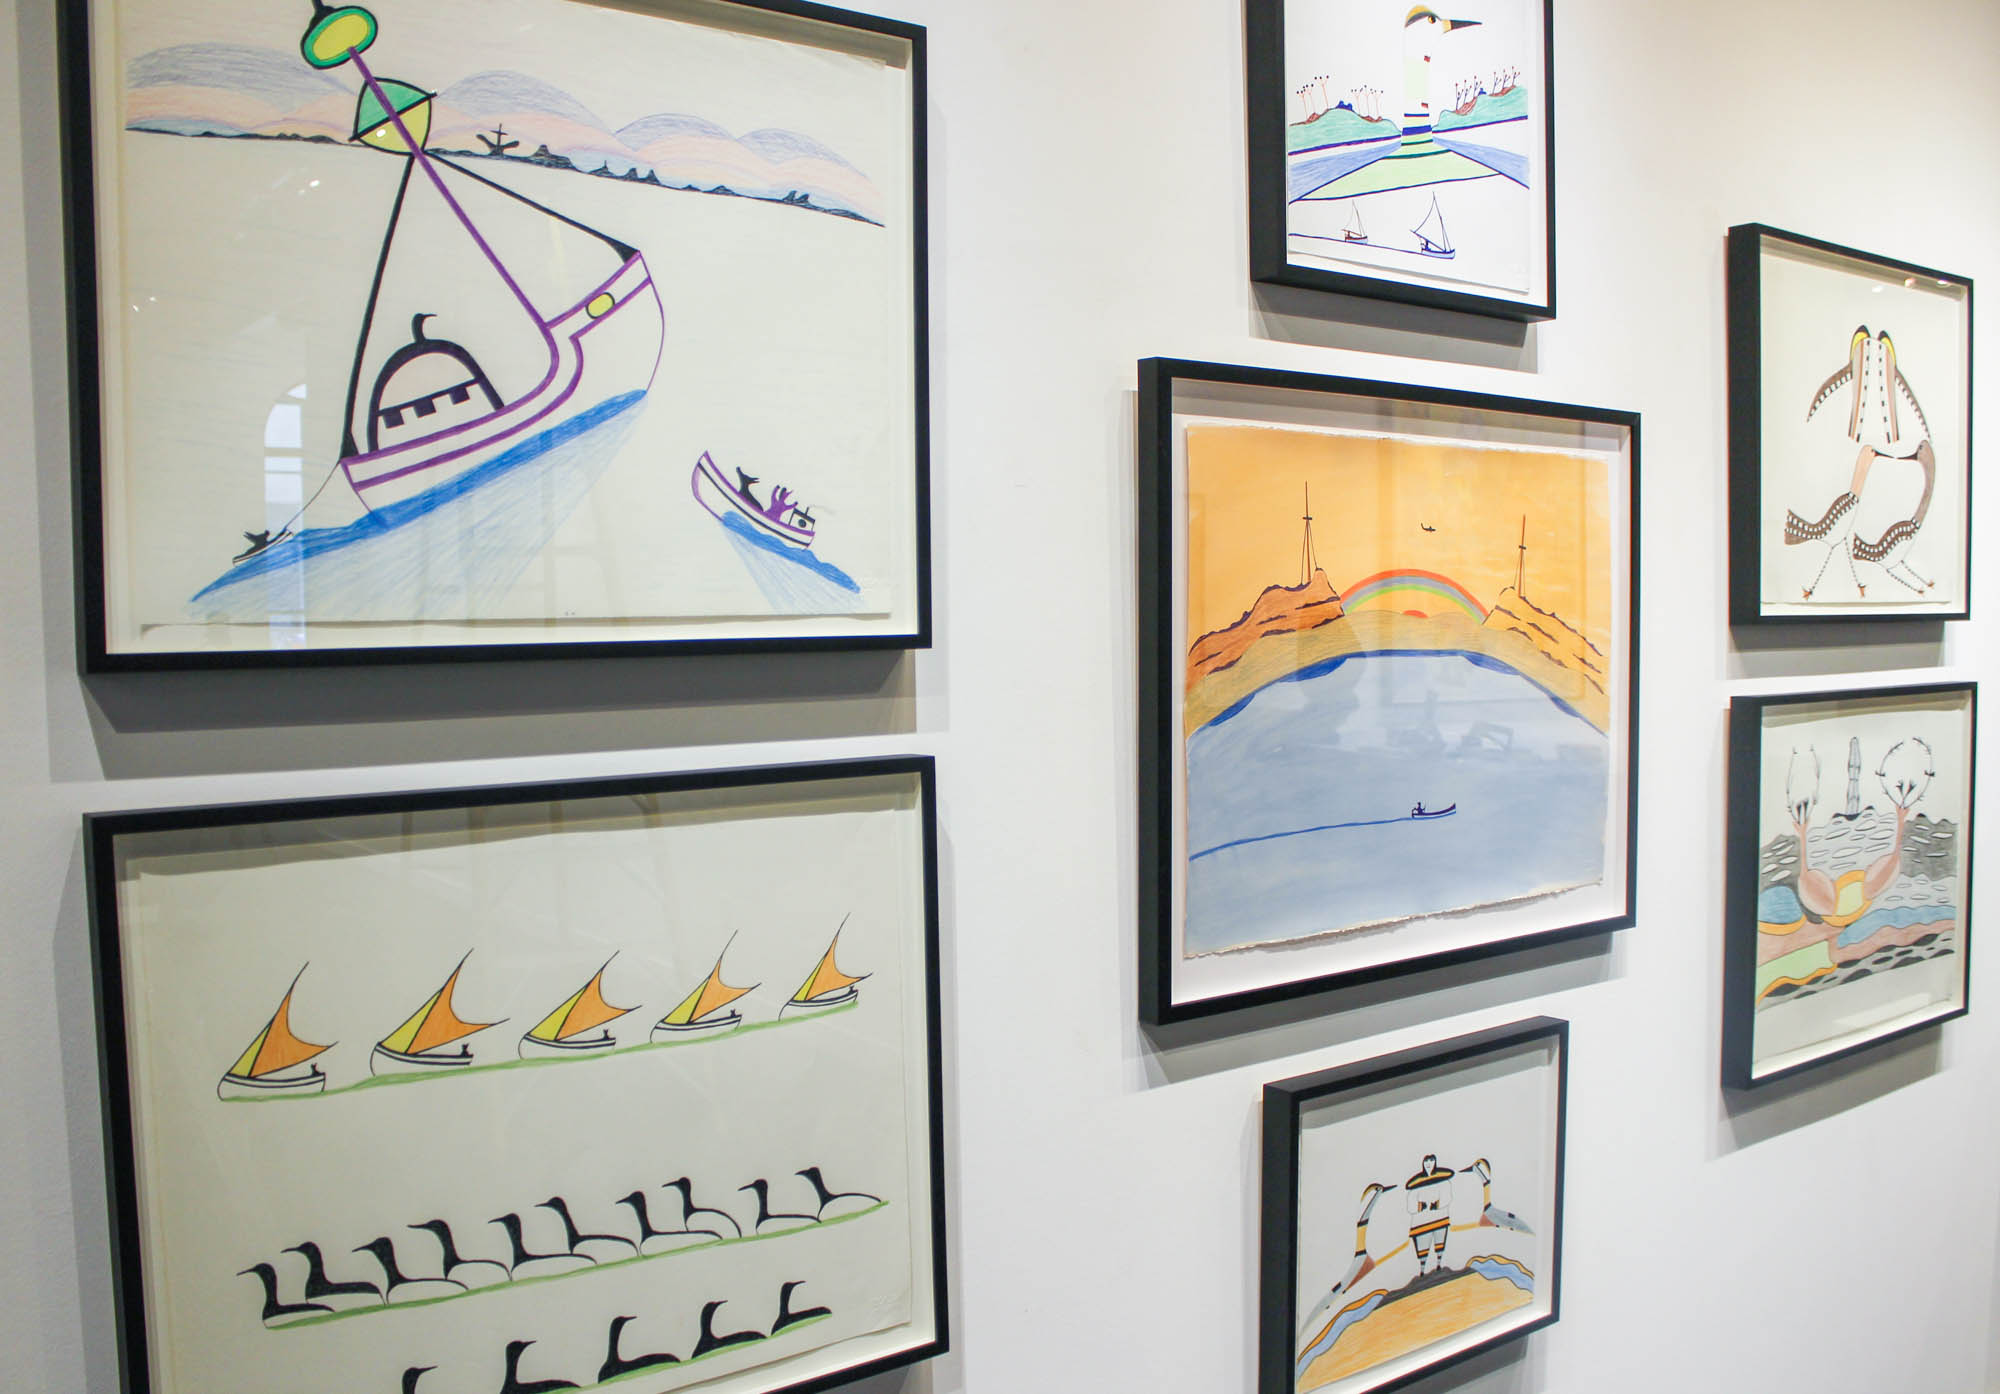 Installation view of Pudlo Pudlat's drawings - Unseen at Feheley Fine Arts in Toronto